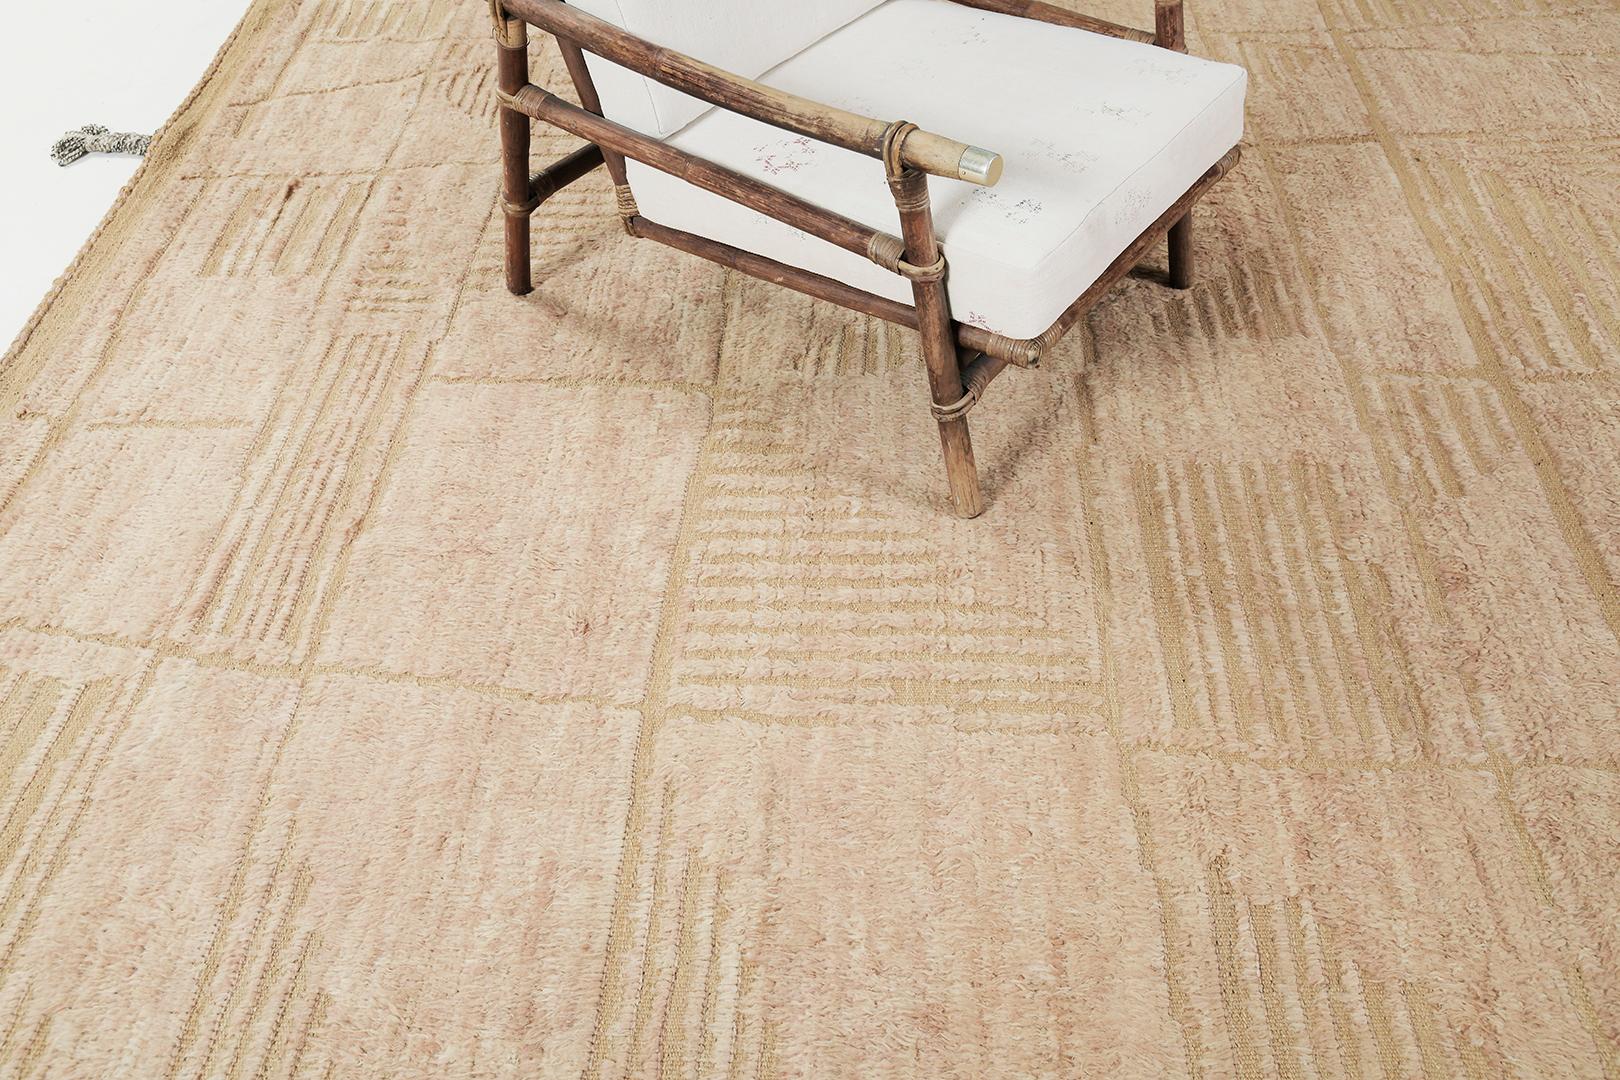 Tisent has a beautiful embossed wool that features various linear strokes. Its warm tone complements your modern contemporary interior and will definitely fascinate the eyes of your guests. This rug plays with textures, linework, and simplicity